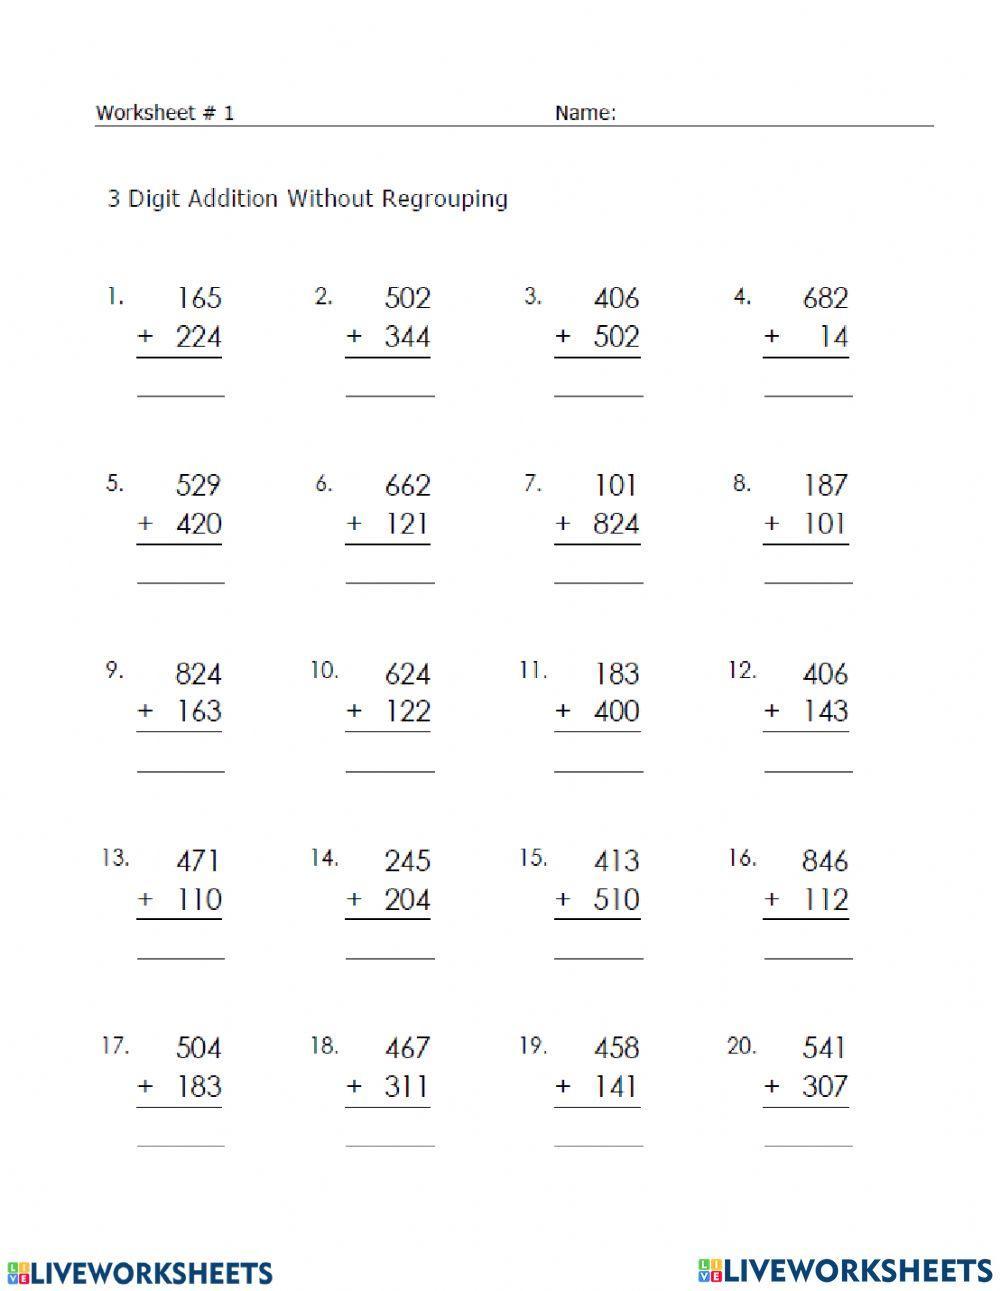 Addtion of three digit numbers